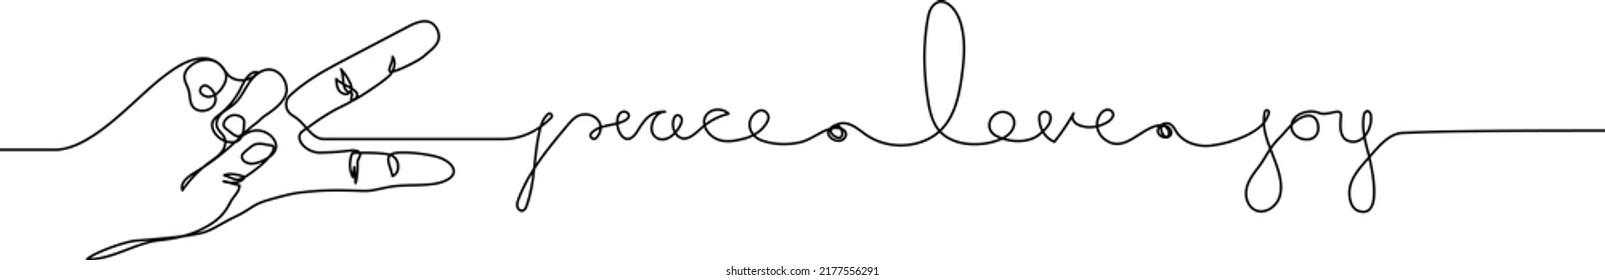 Peace love joy handwritten inscription and symbol peace in hand  Continuous one line drawing  Minimal line art 